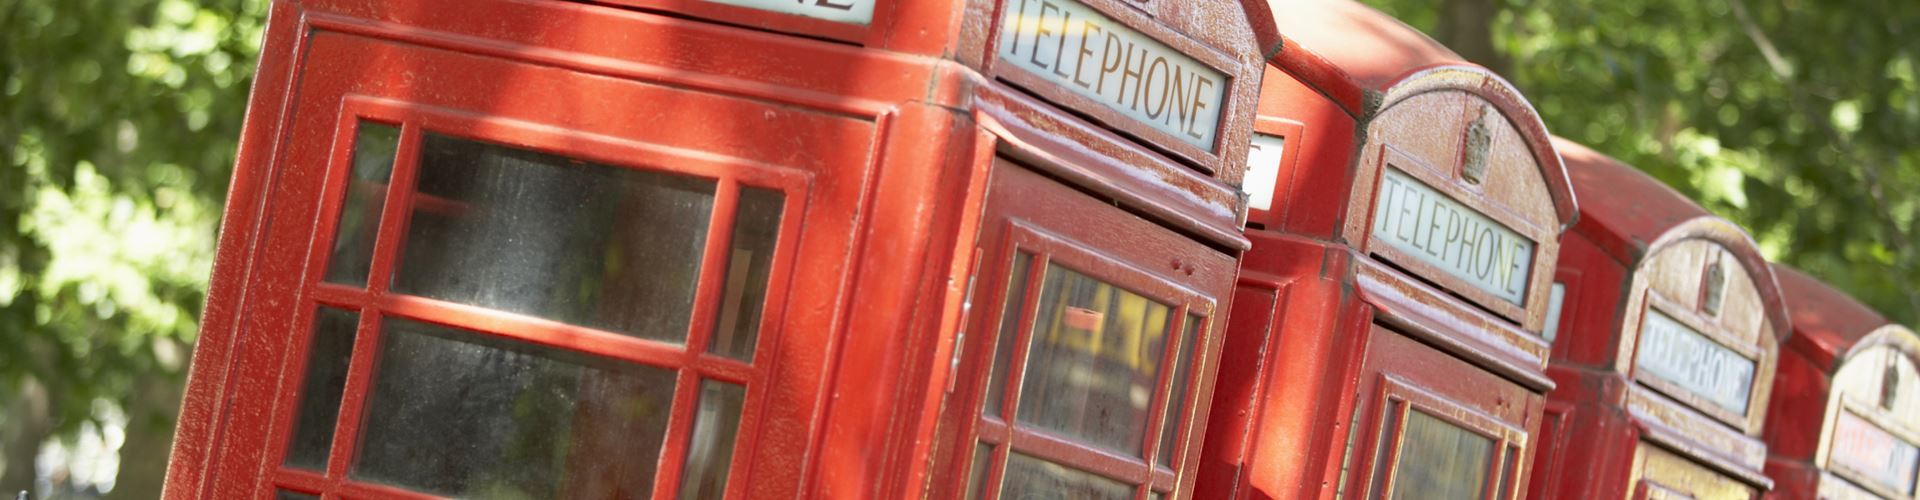 Red telephone boxes to be transformed into mini-offices